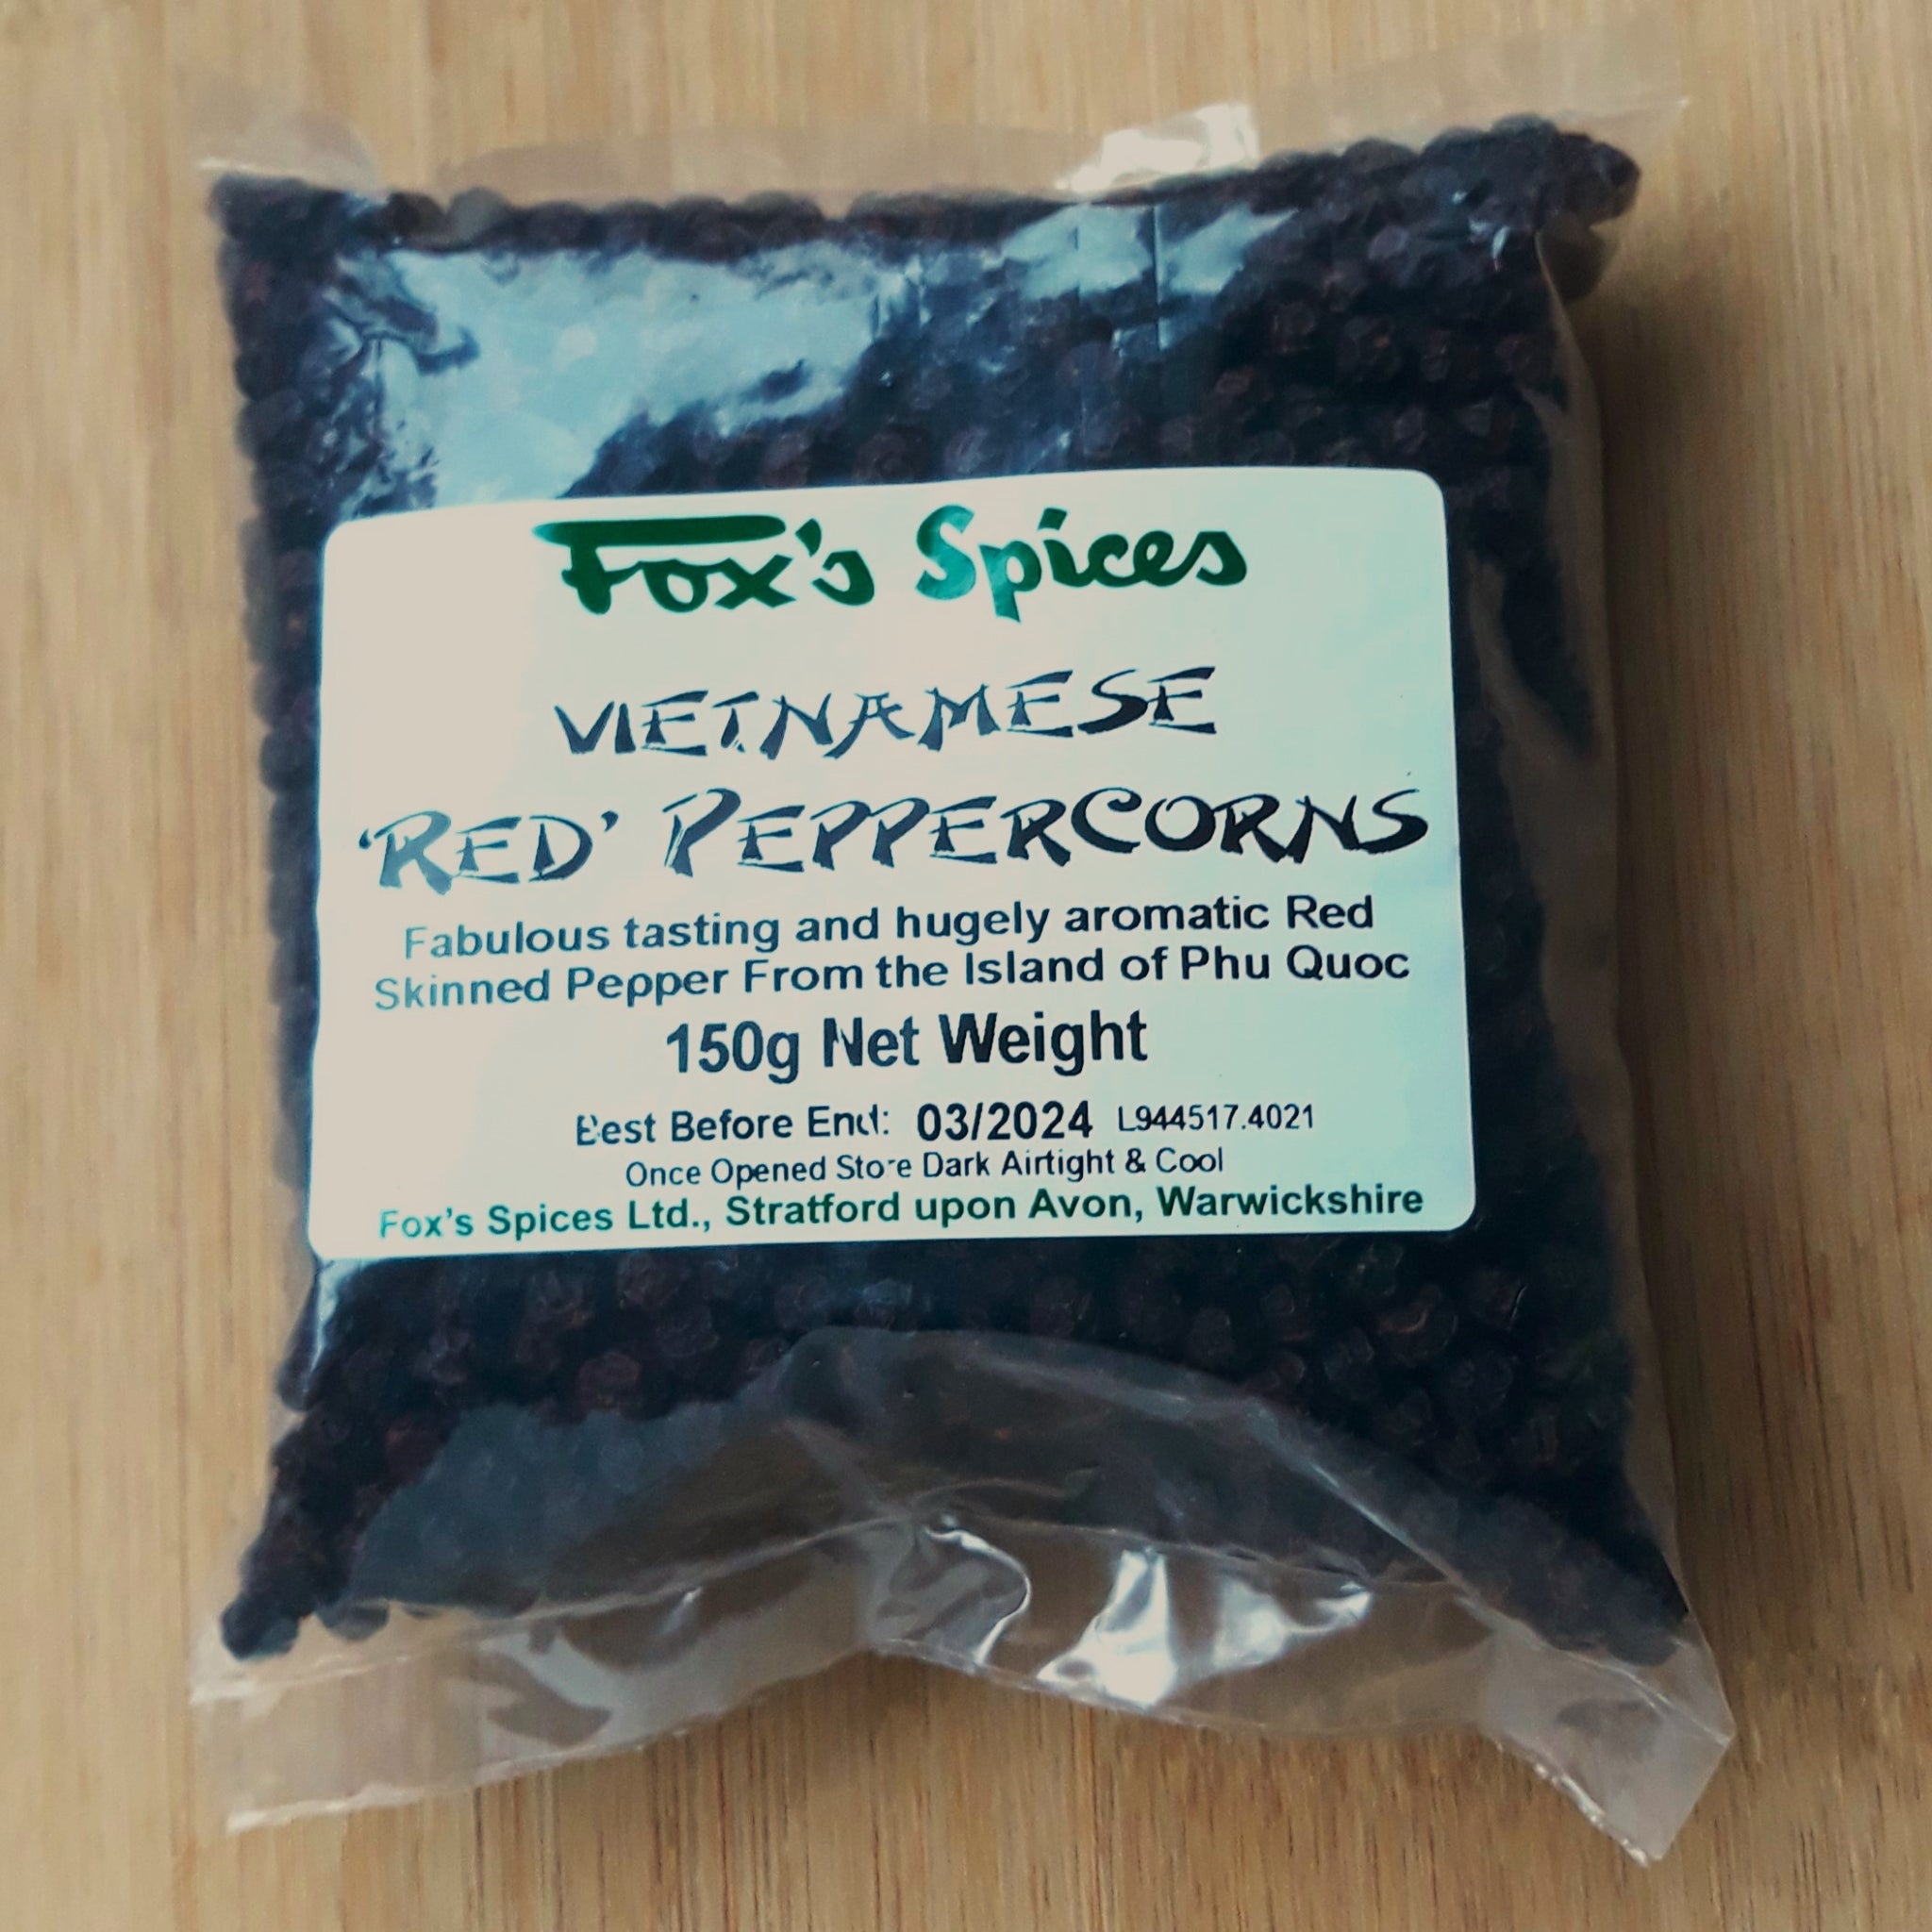 Red Peppercorns sold by Fox's Spices in 150g bags.